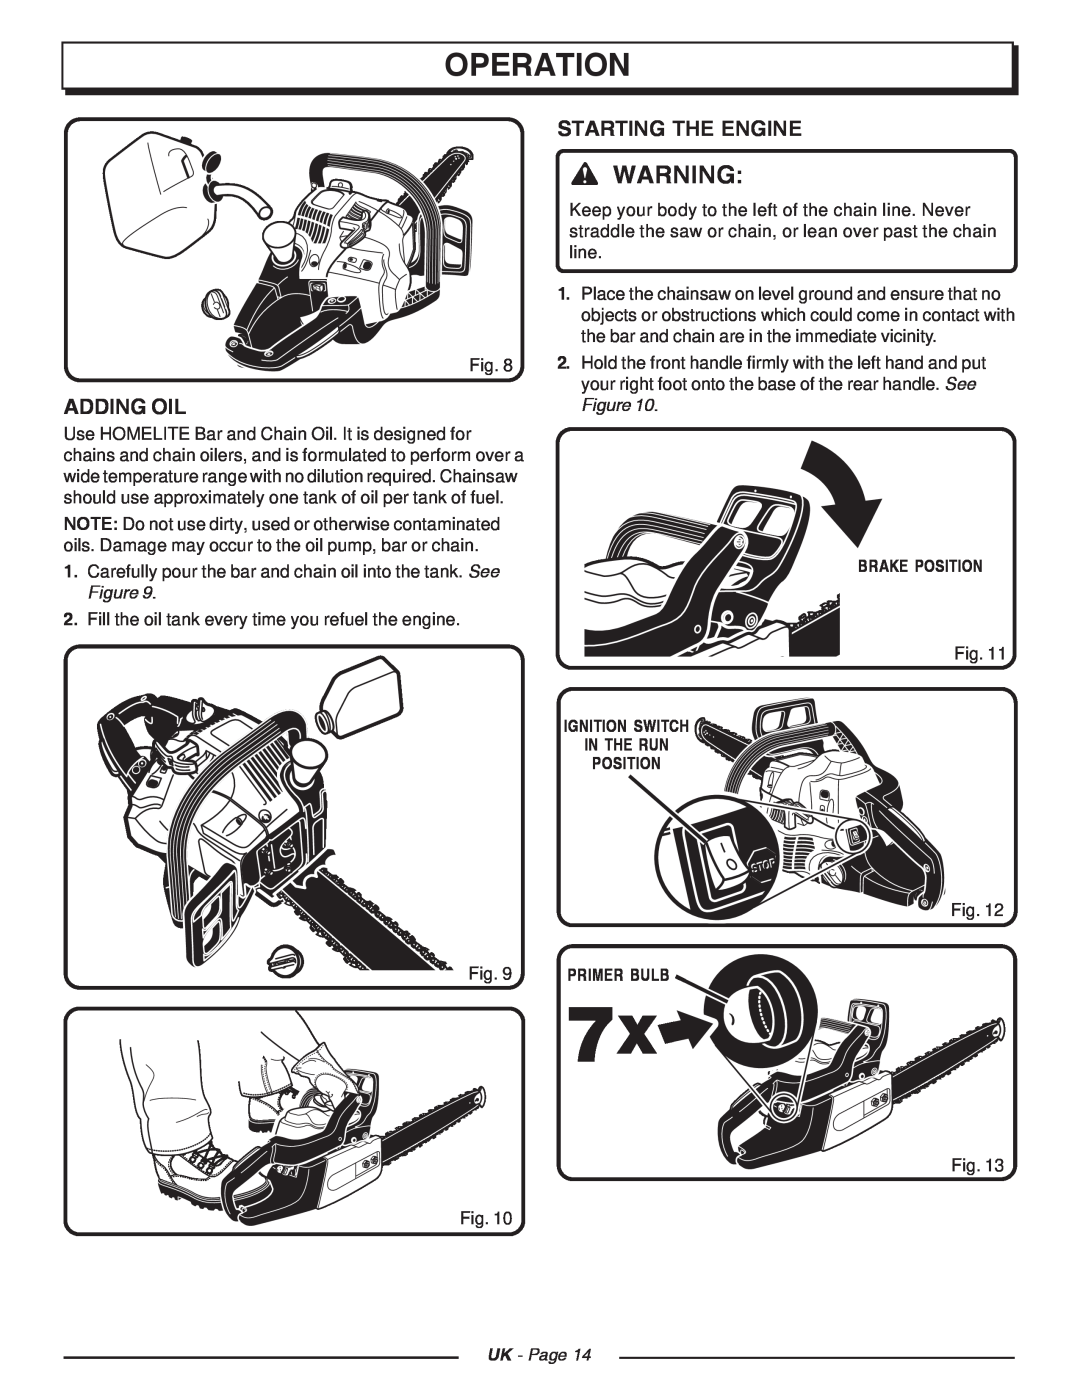 Homelite CSP3816 manual Adding Oil, Starting The Engine, Brake Position, Ignition Switch In The Run Position, Primer Bulb 